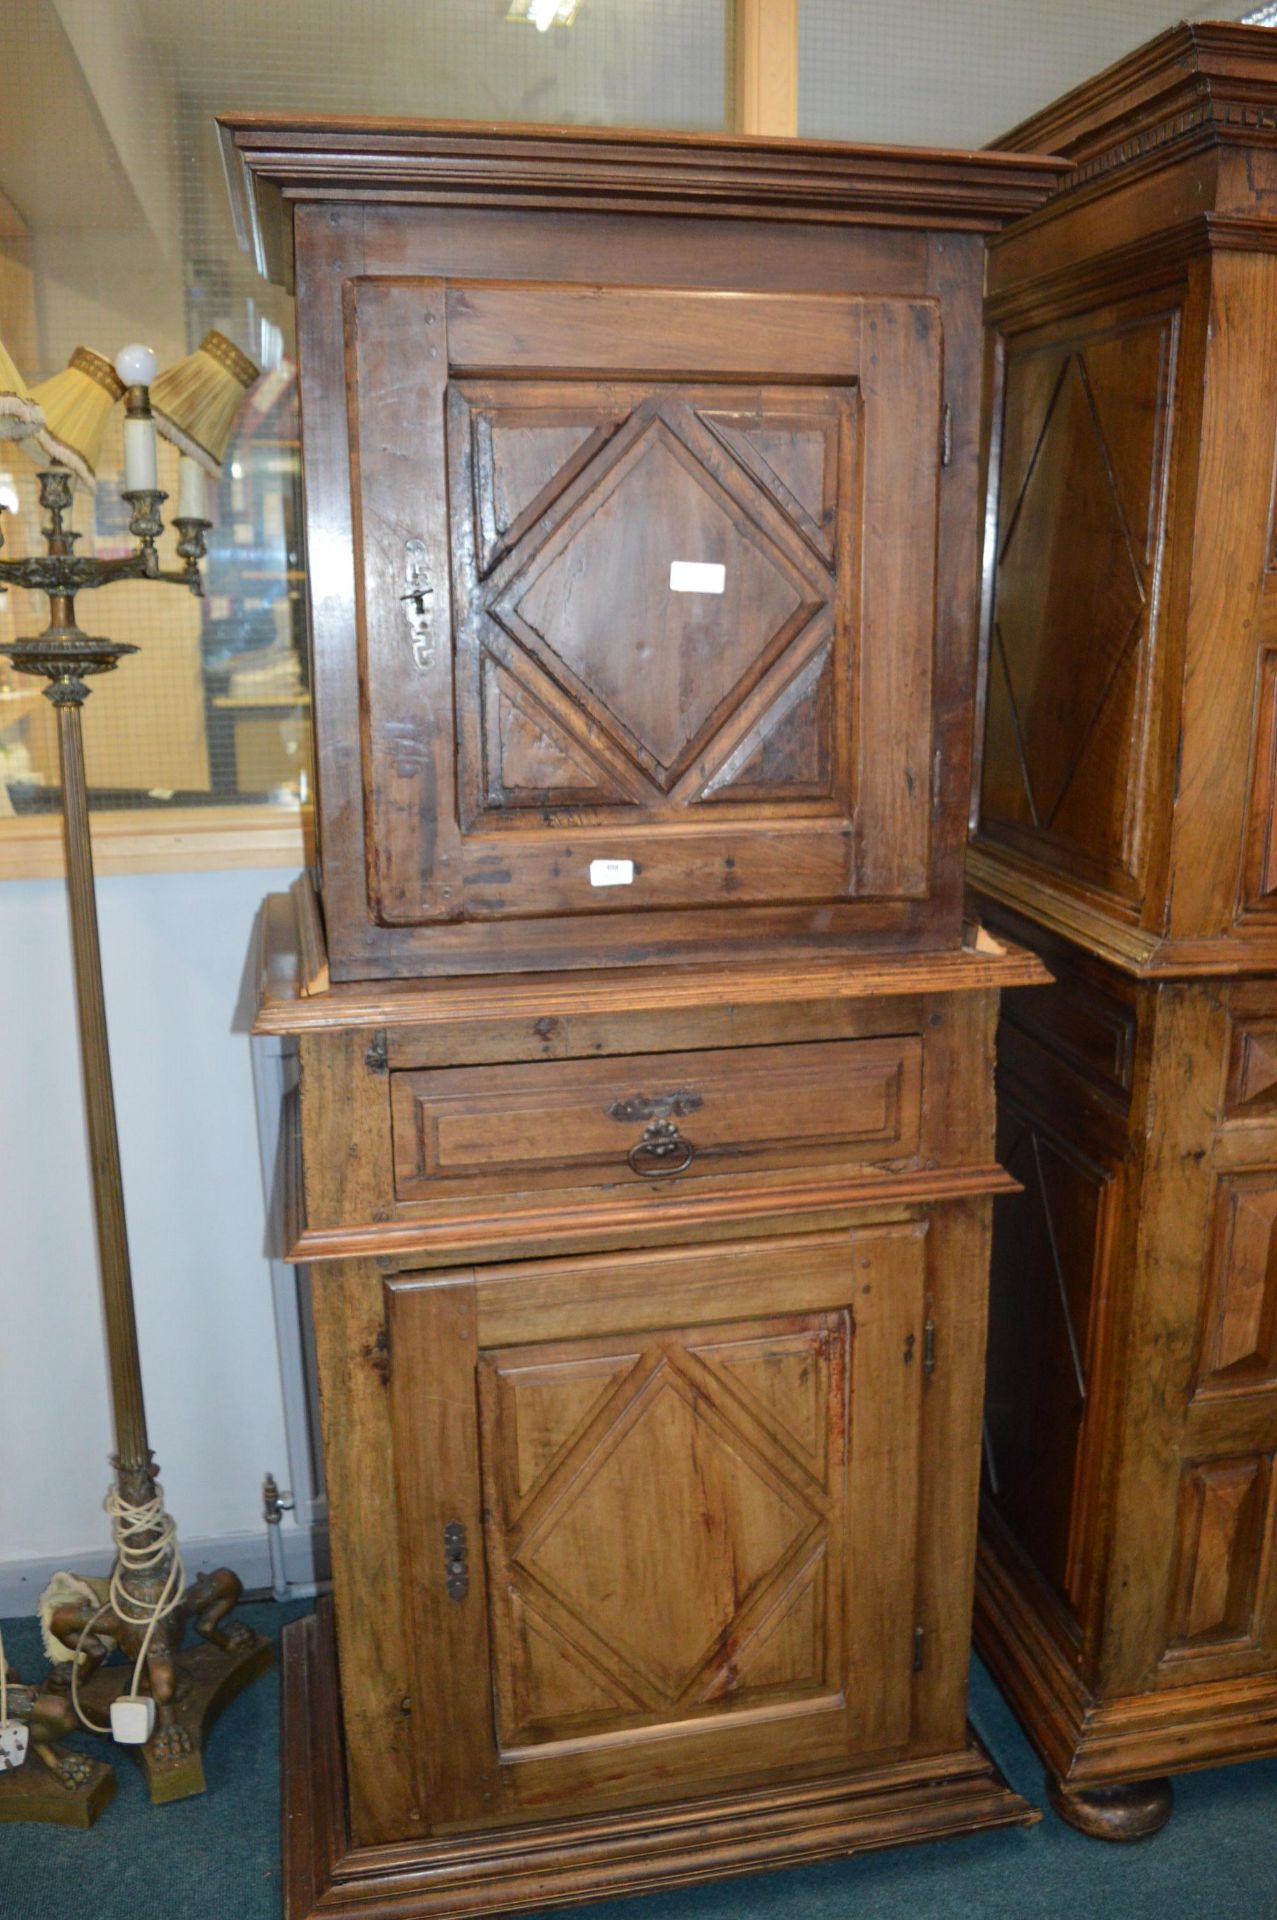 French Walnut Louis XIII Cabinet Deux Corps